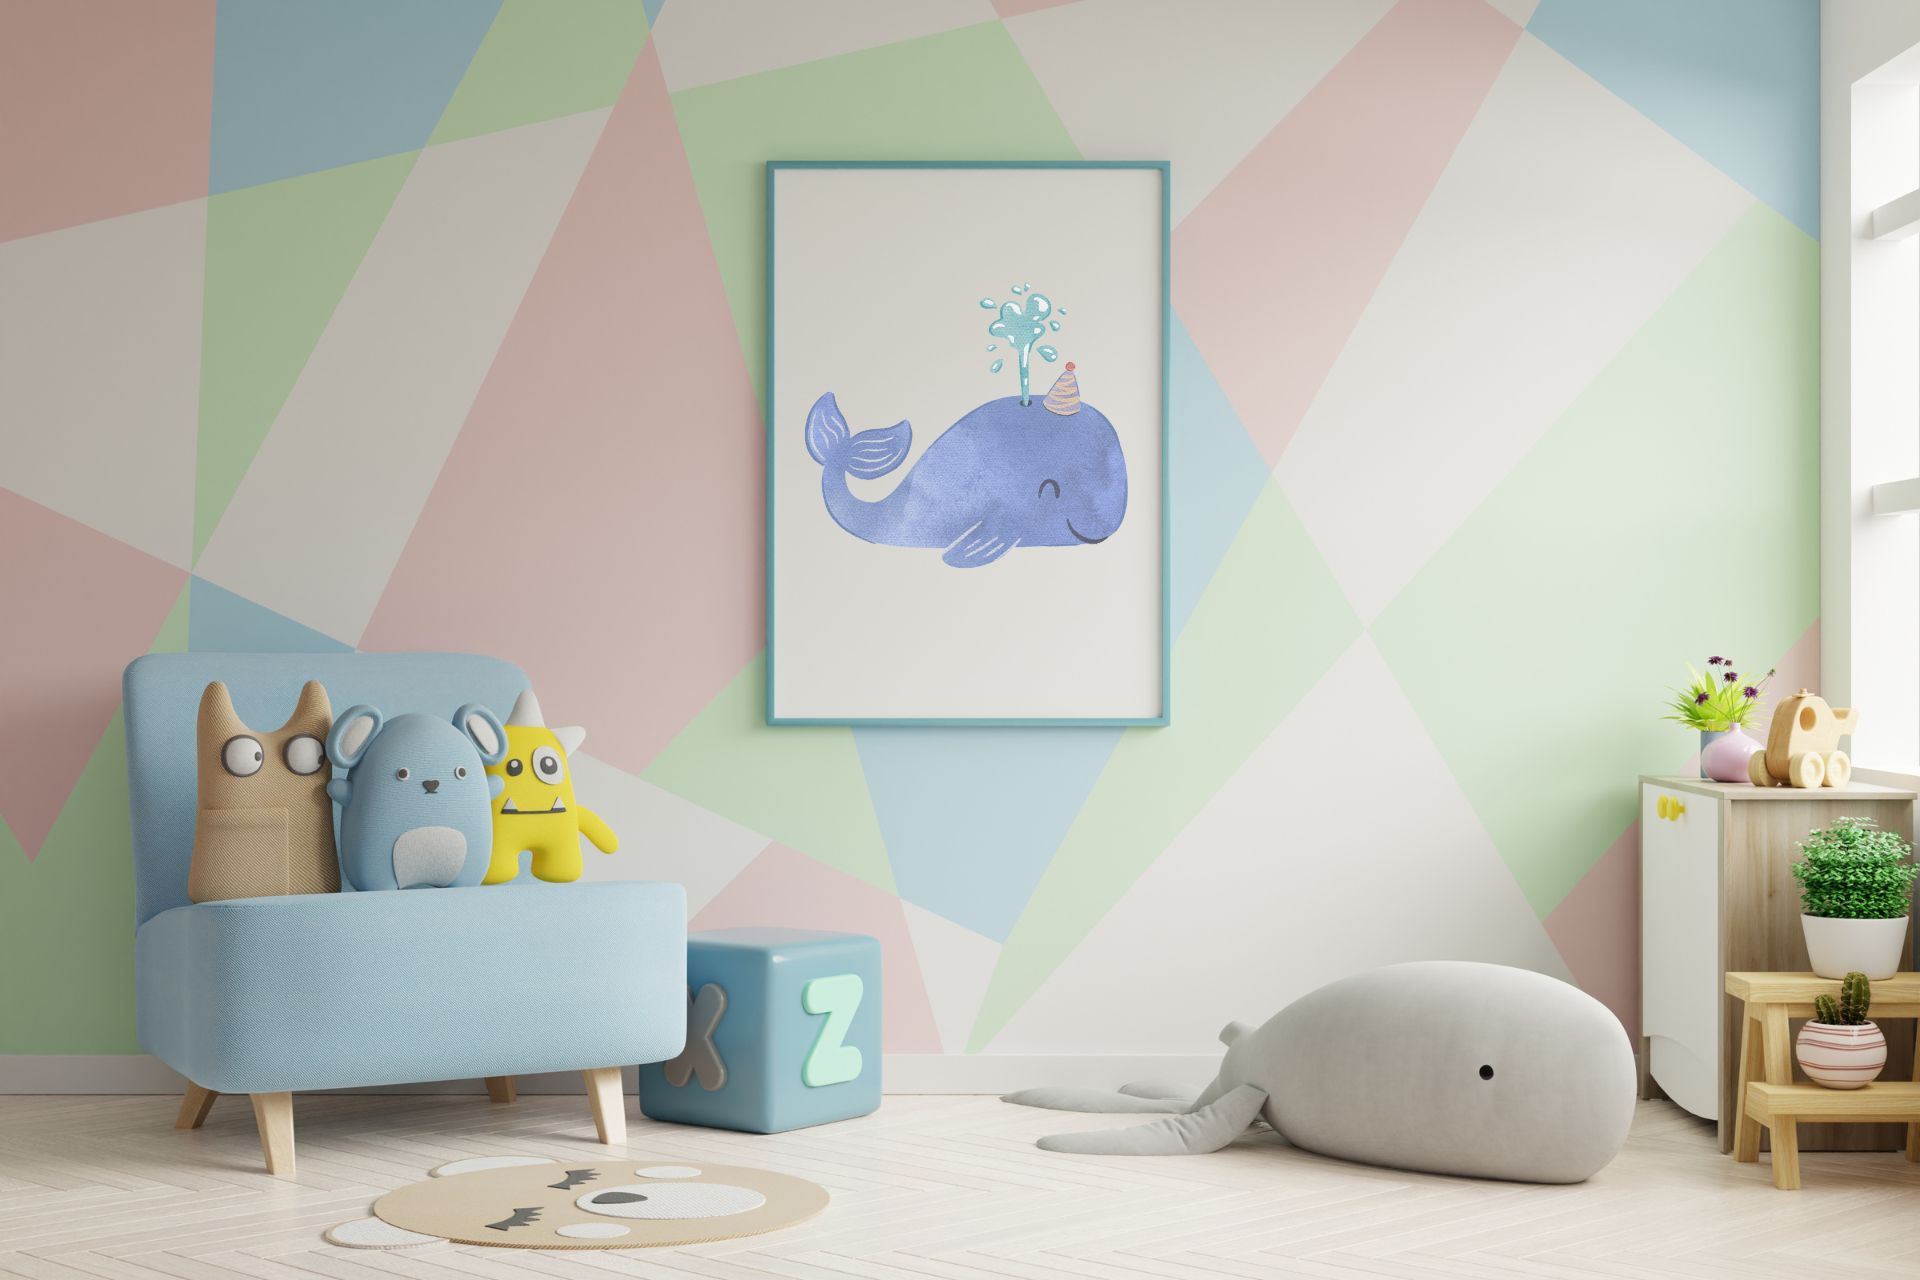 Kids Playroom Wallpaper: Best Colors and Types